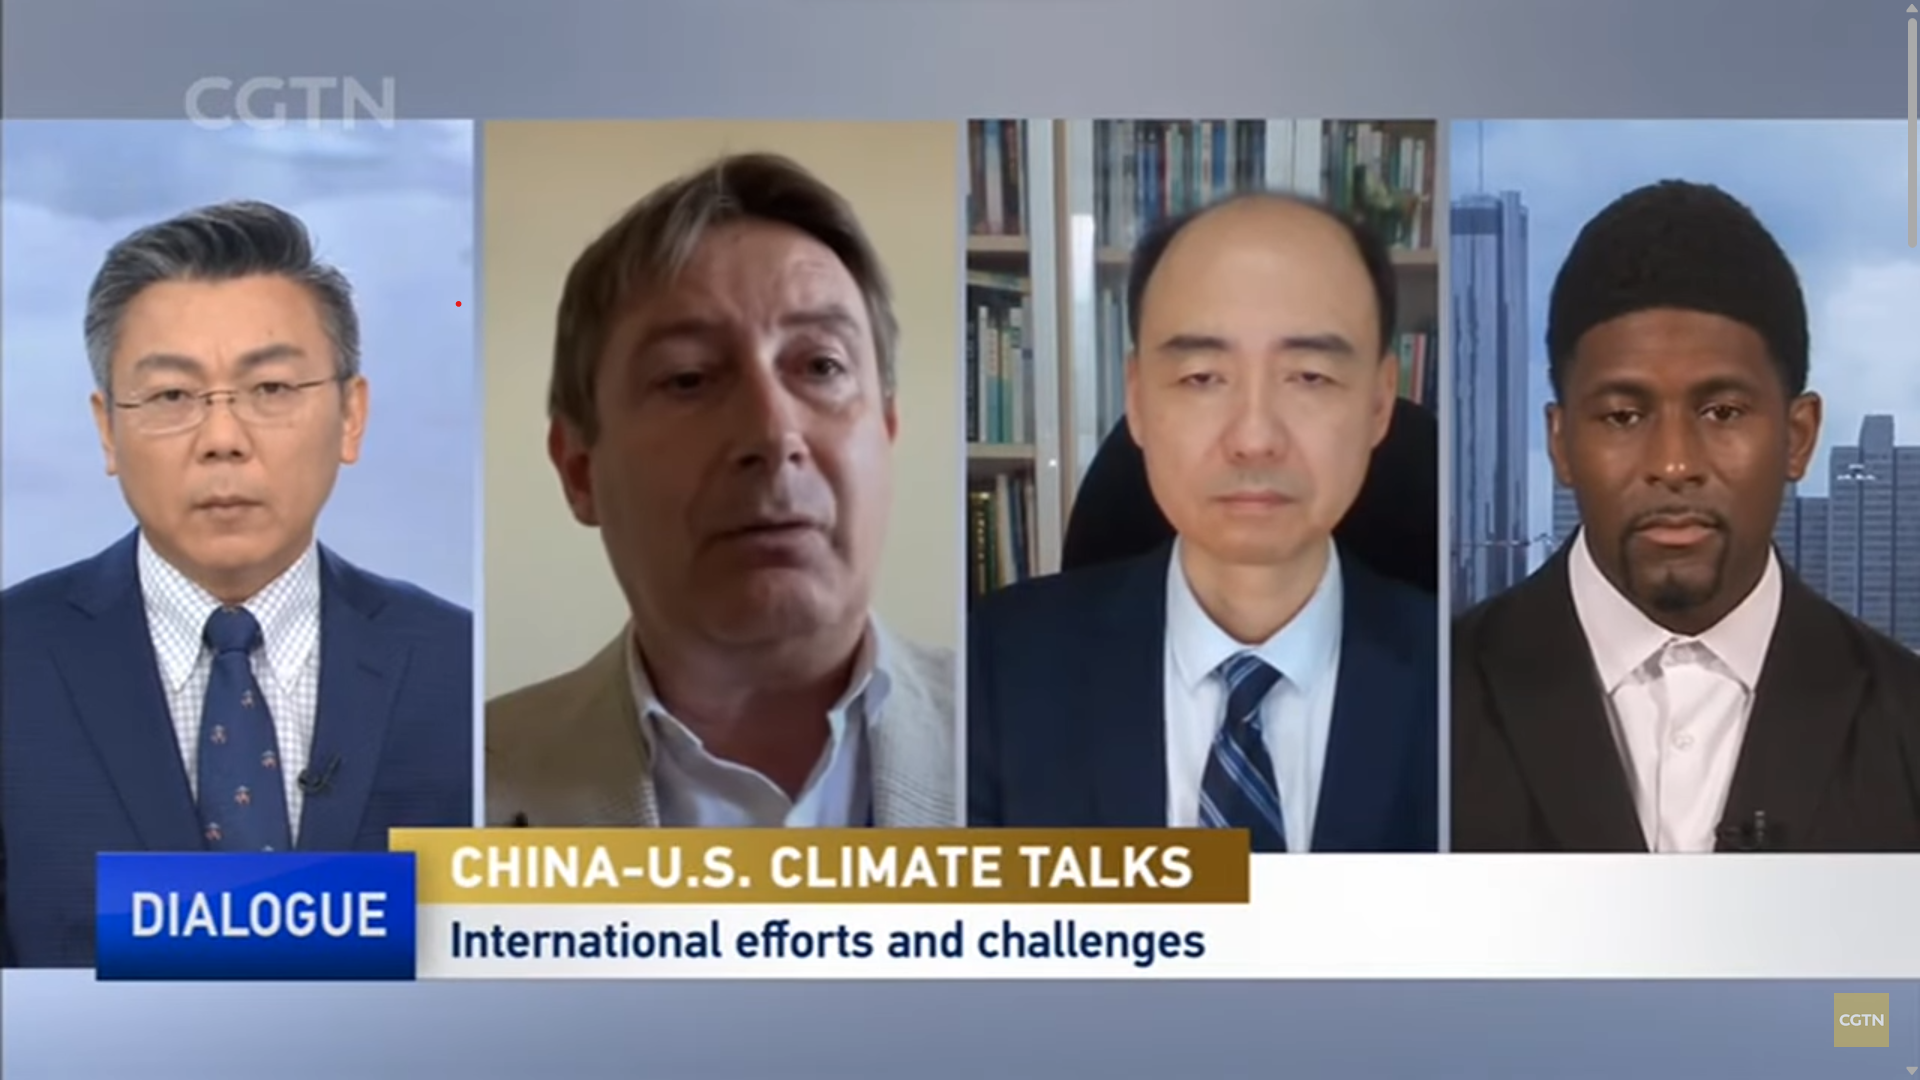 The Bridge Tank: US-China climate talks should not forget the Global South – CGTN Dialogue